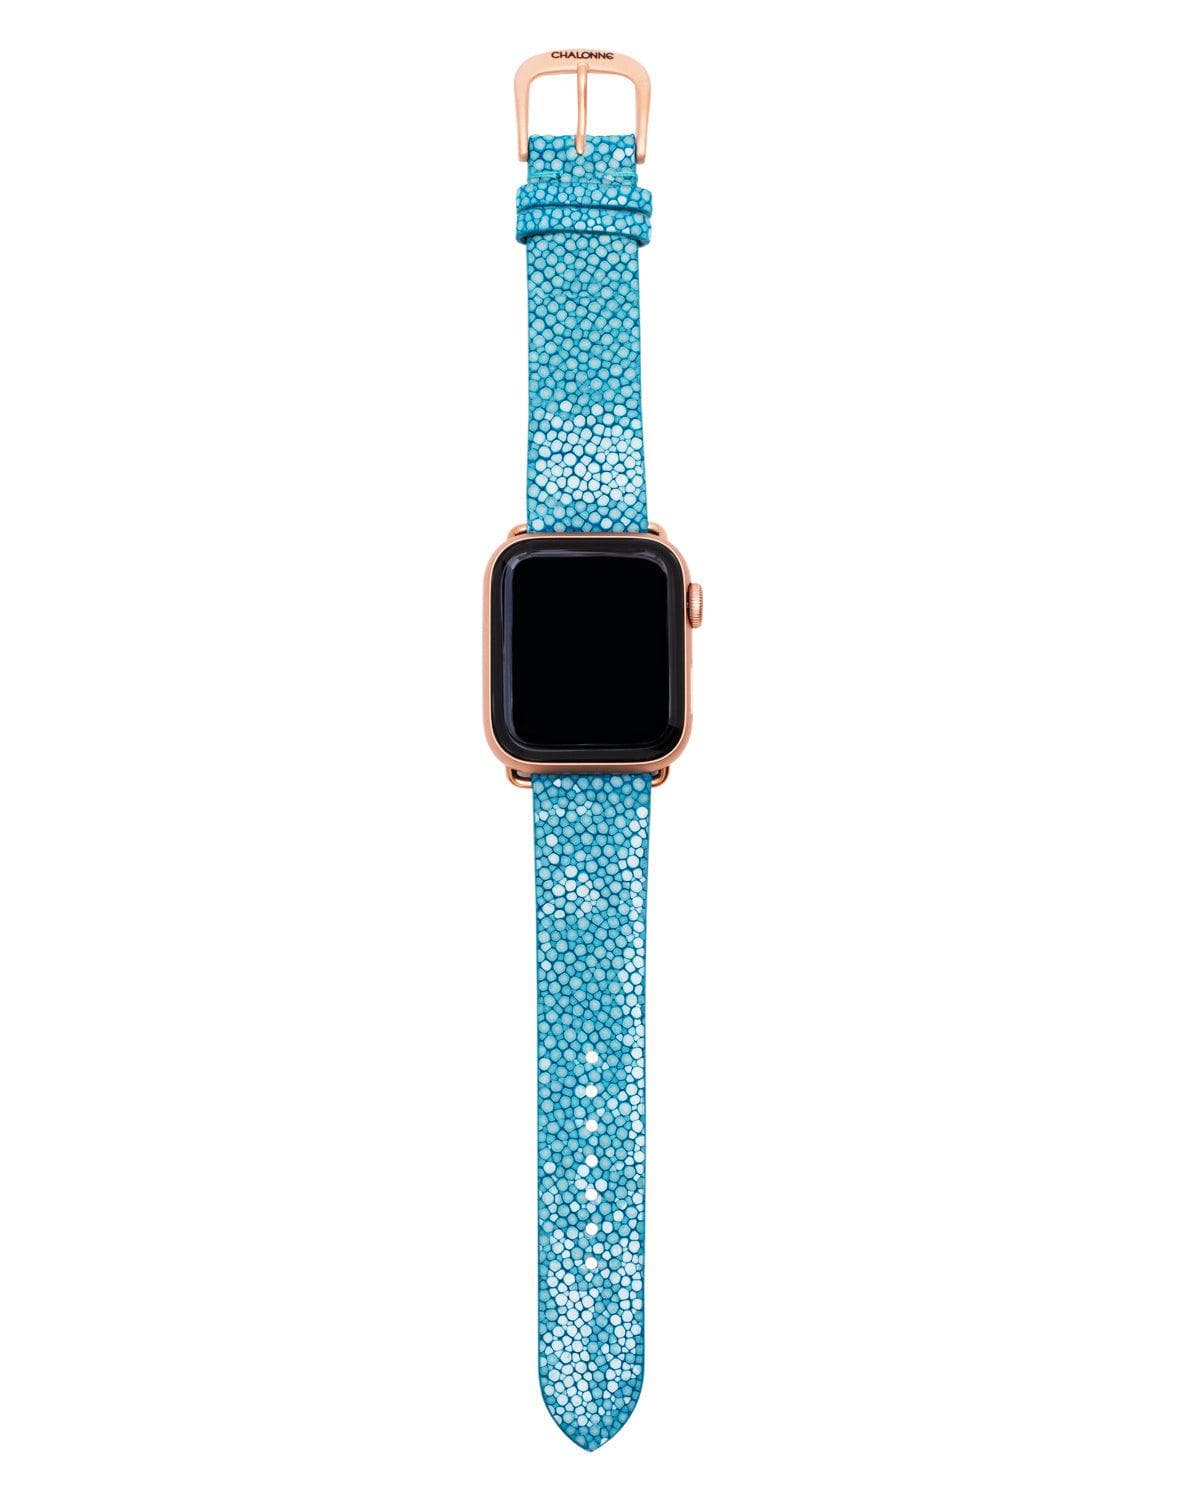 Bedarra Watch Band in Turquoise